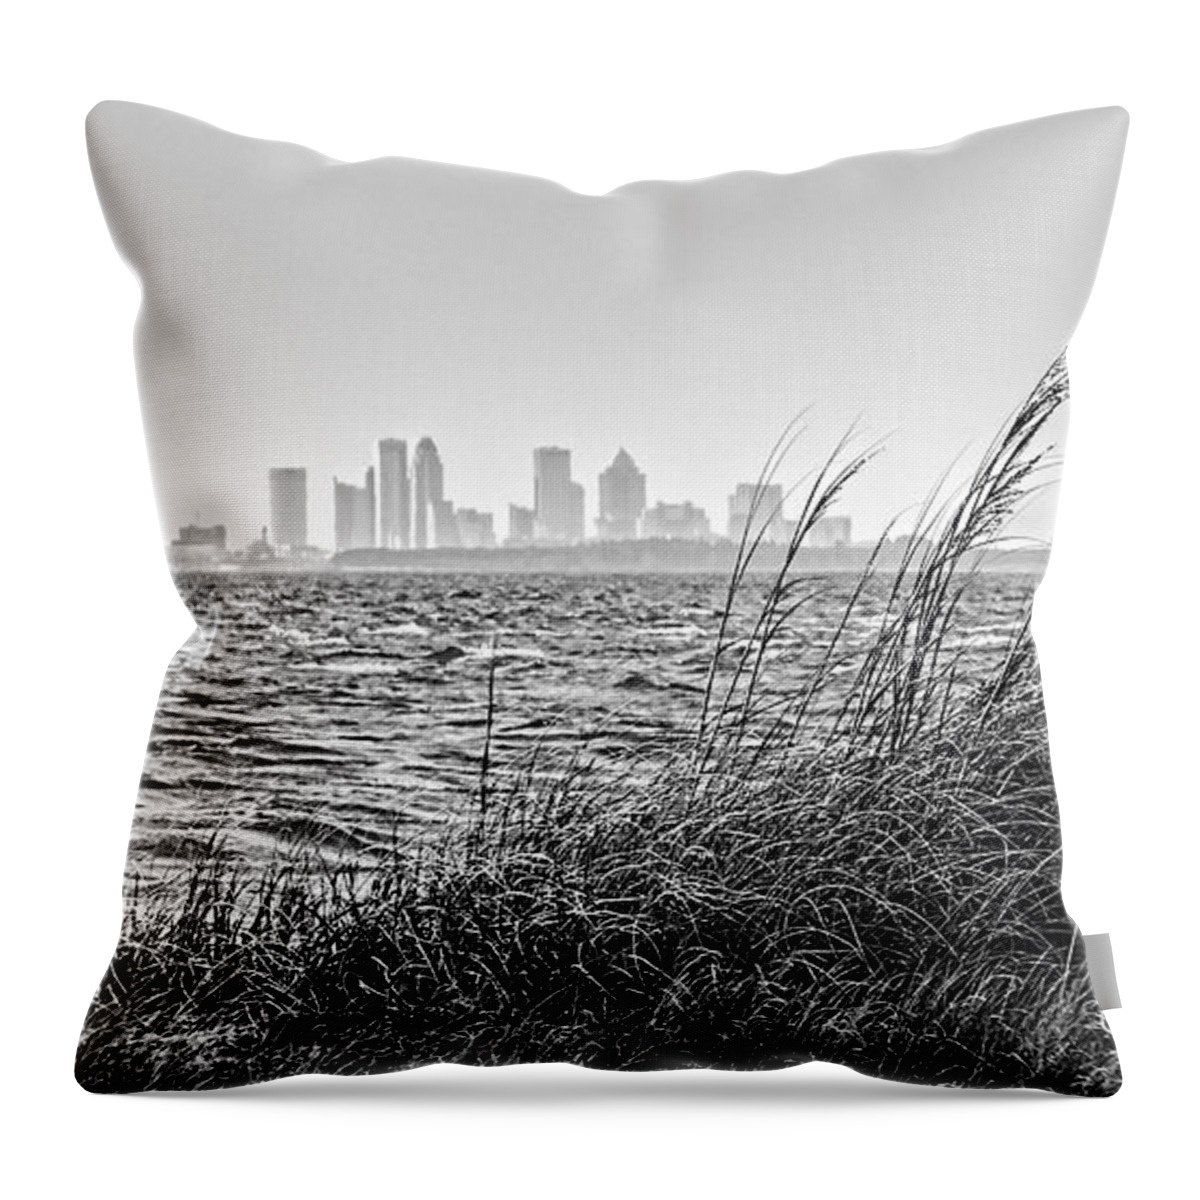 Tampa Bay Throw Pillow featuring the photograph Tampa Across The Bay by Marvin Spates